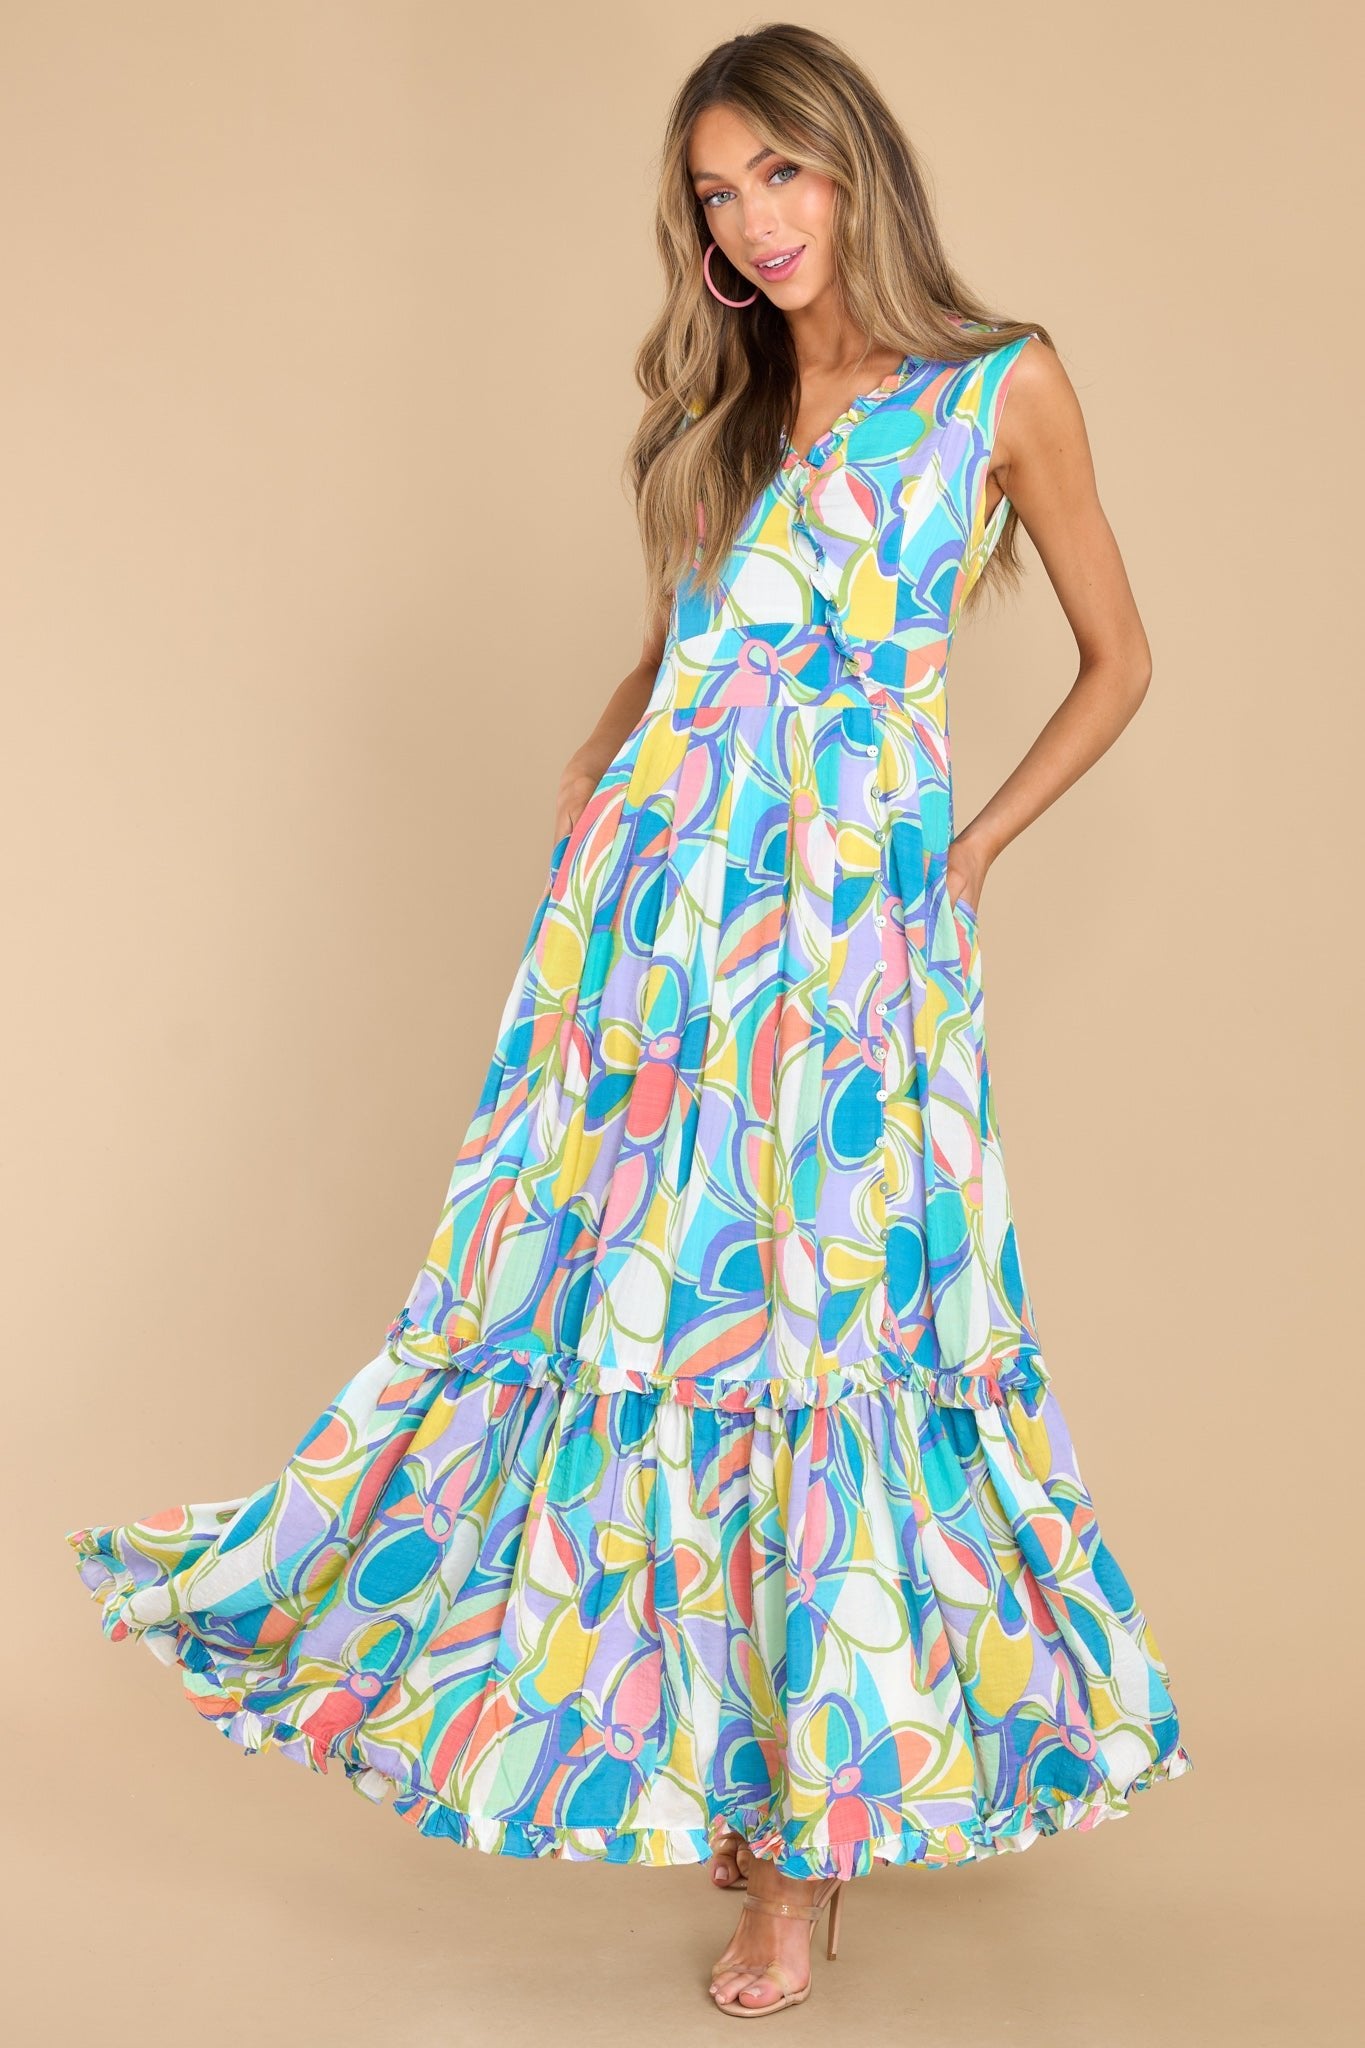 Here and Now Blue Multi Print Maxi Dress - Red Dress